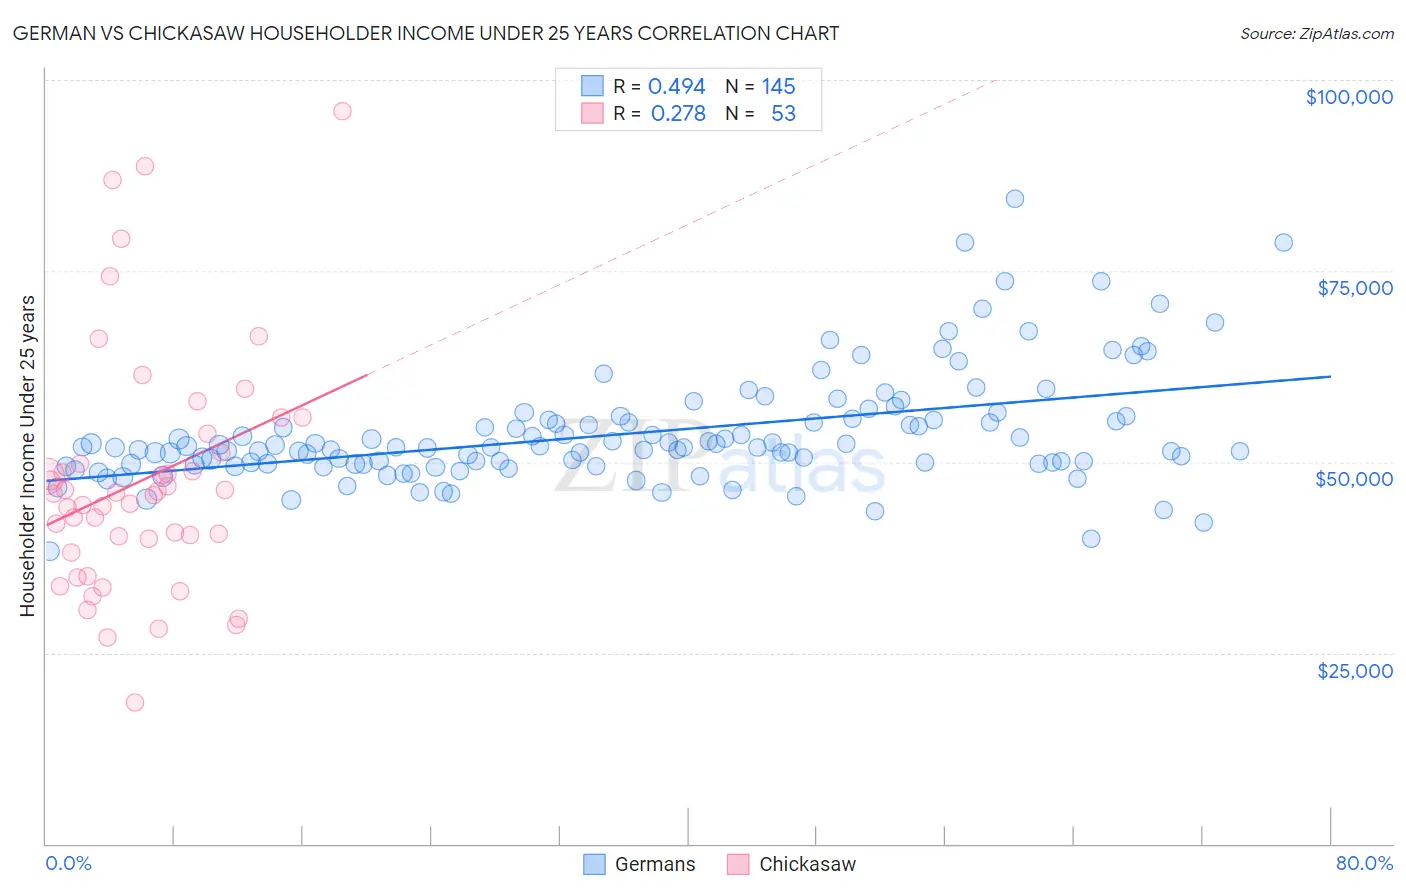 German vs Chickasaw Householder Income Under 25 years